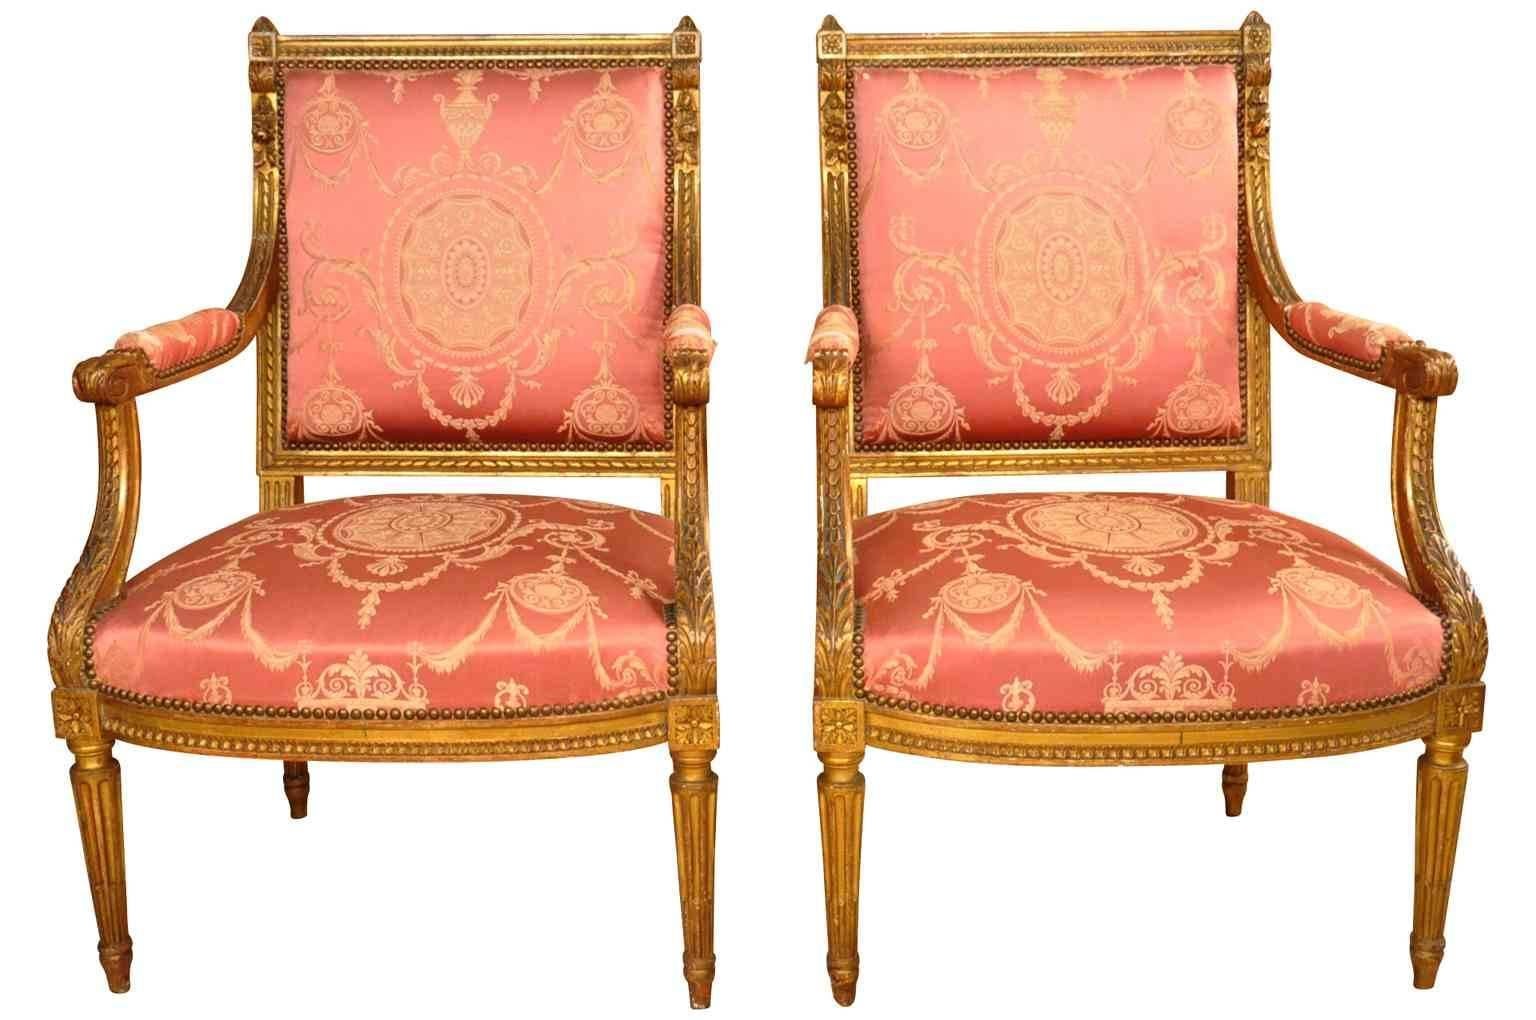 Pair of 19th century French Napoleon III period fauteuilles in giltwood. Beautifully constructed with padded arms and fluted legs. High quality gilt.